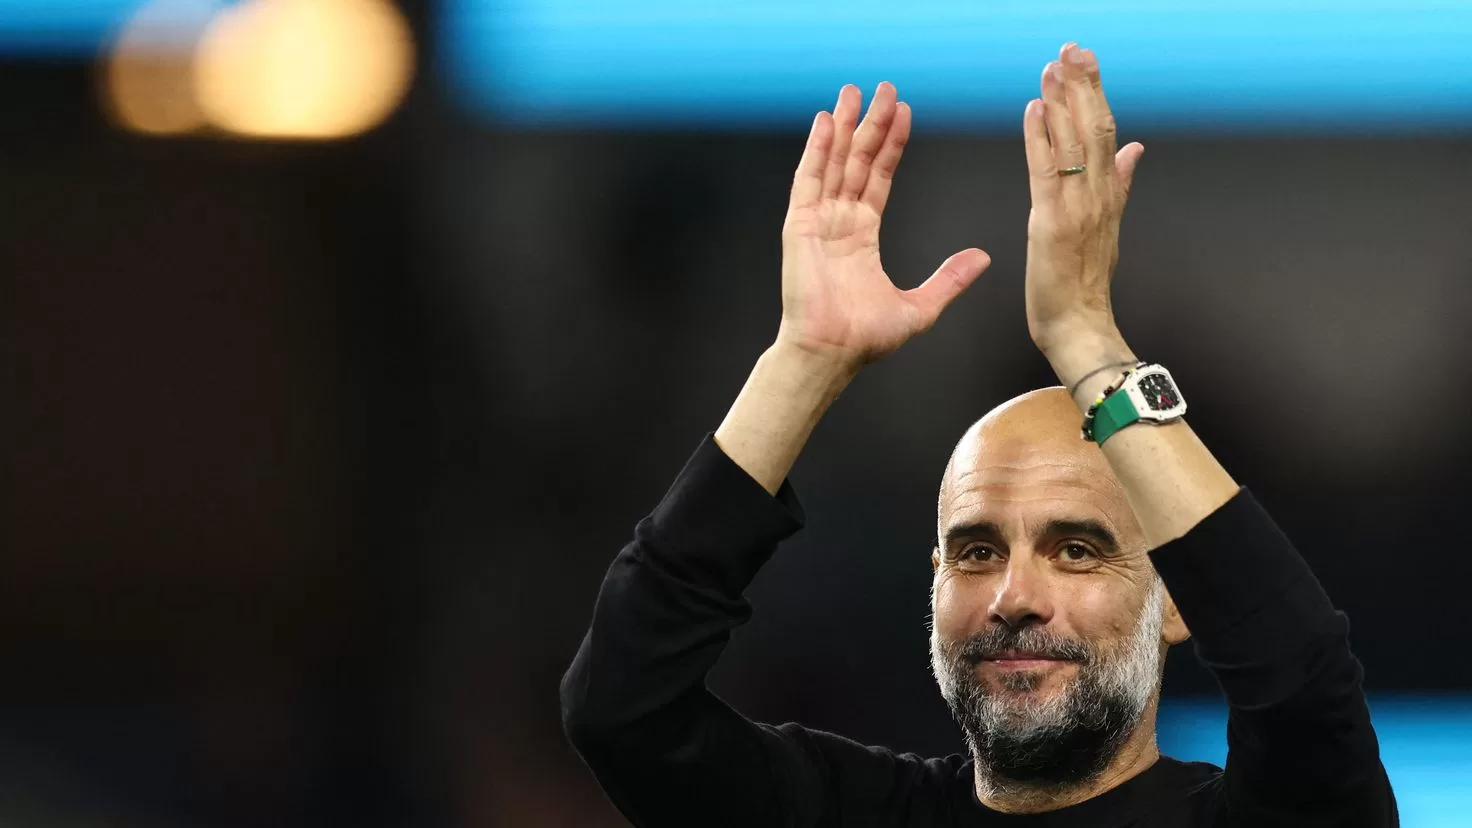 Pep Guardiola's luxurious and exclusive watch